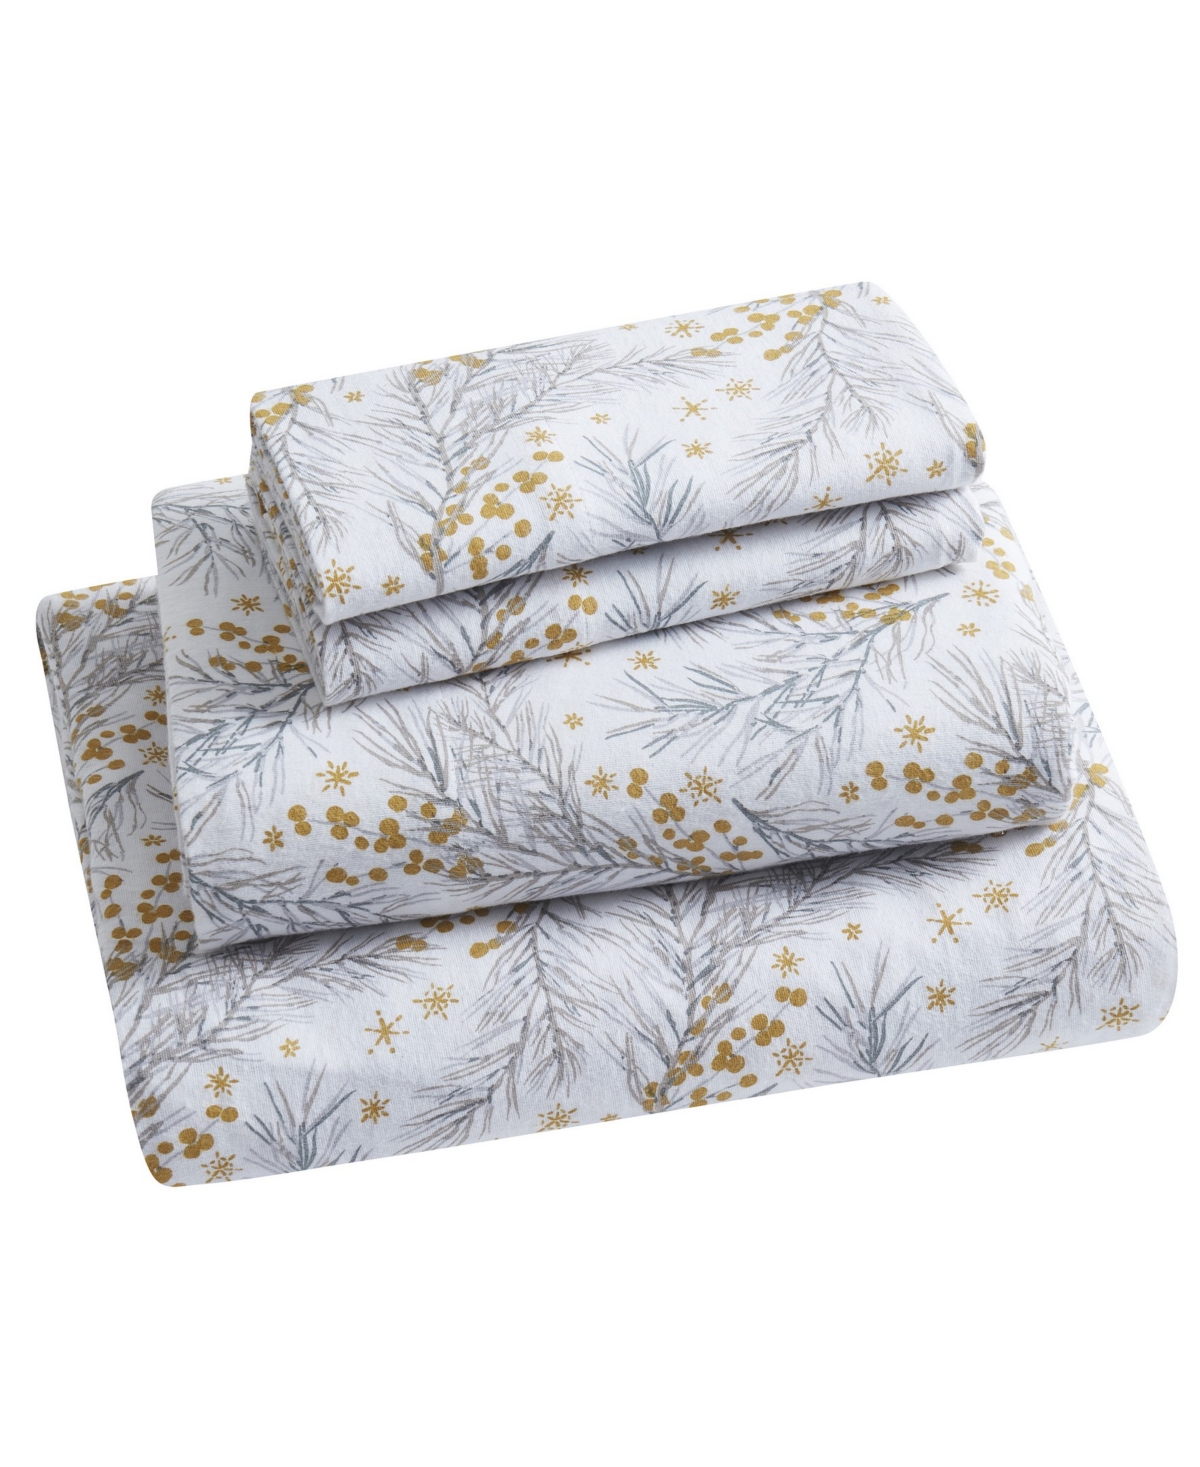 Tahari Home Pine 100% Cotton Flannel 4-pc. Sheet Set, Full In Gold